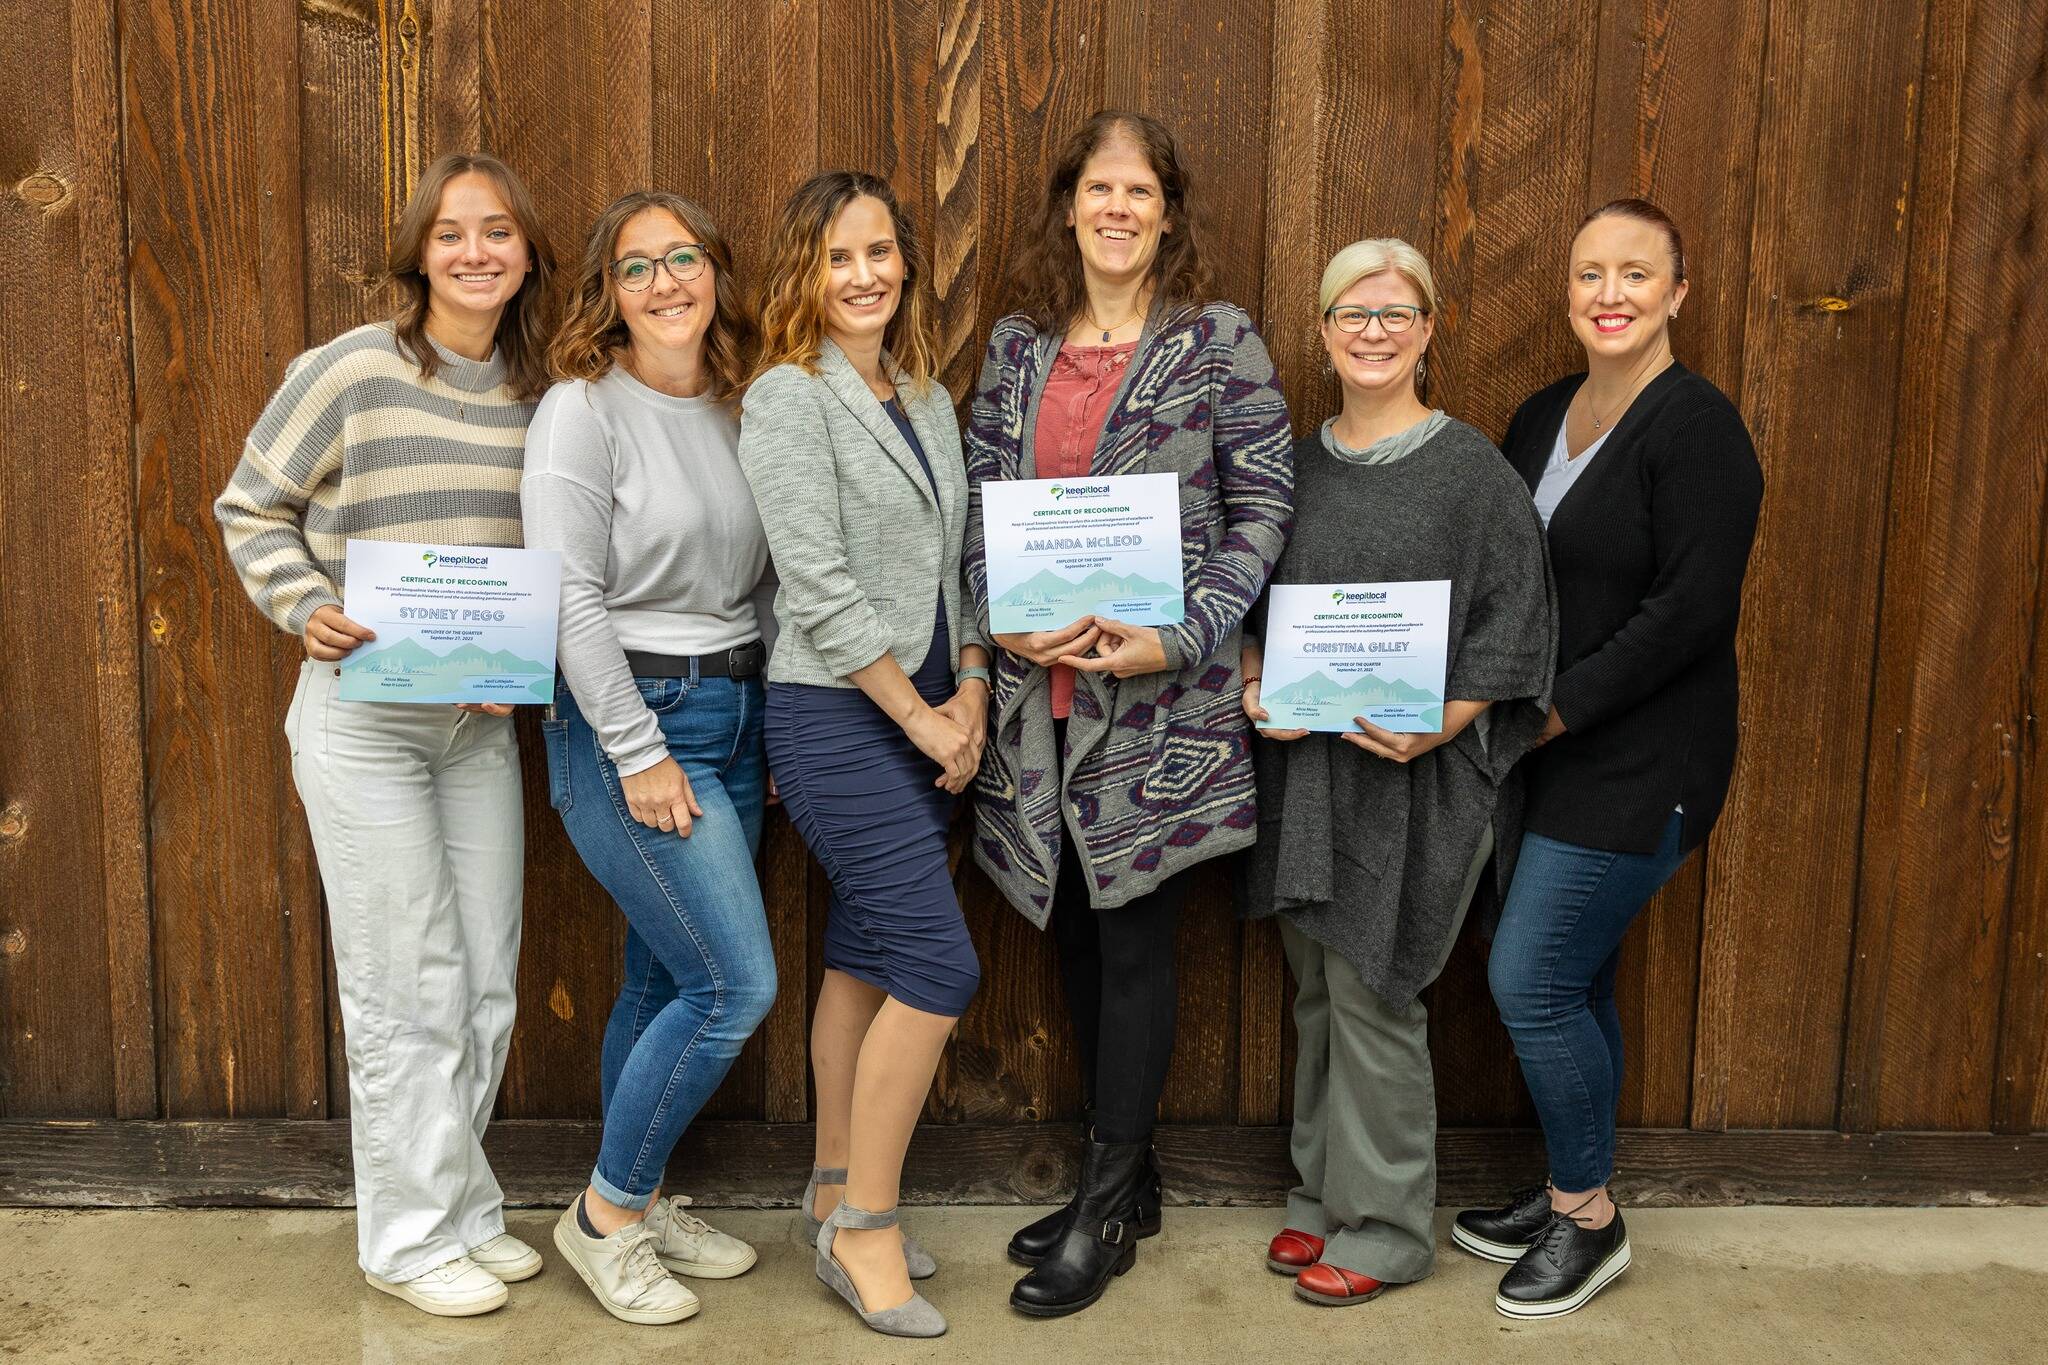 Keep It Local Snoqualmie Valley Employee of the Quarter winners pose for a photo at North Fork Farms on Sept. 27. From left: Sydney Pegg, April Littlejohn, Pamela Savagaonkar, Amanda McLeod, Christina Gilley, Katie Linder. Courtesy Photo.